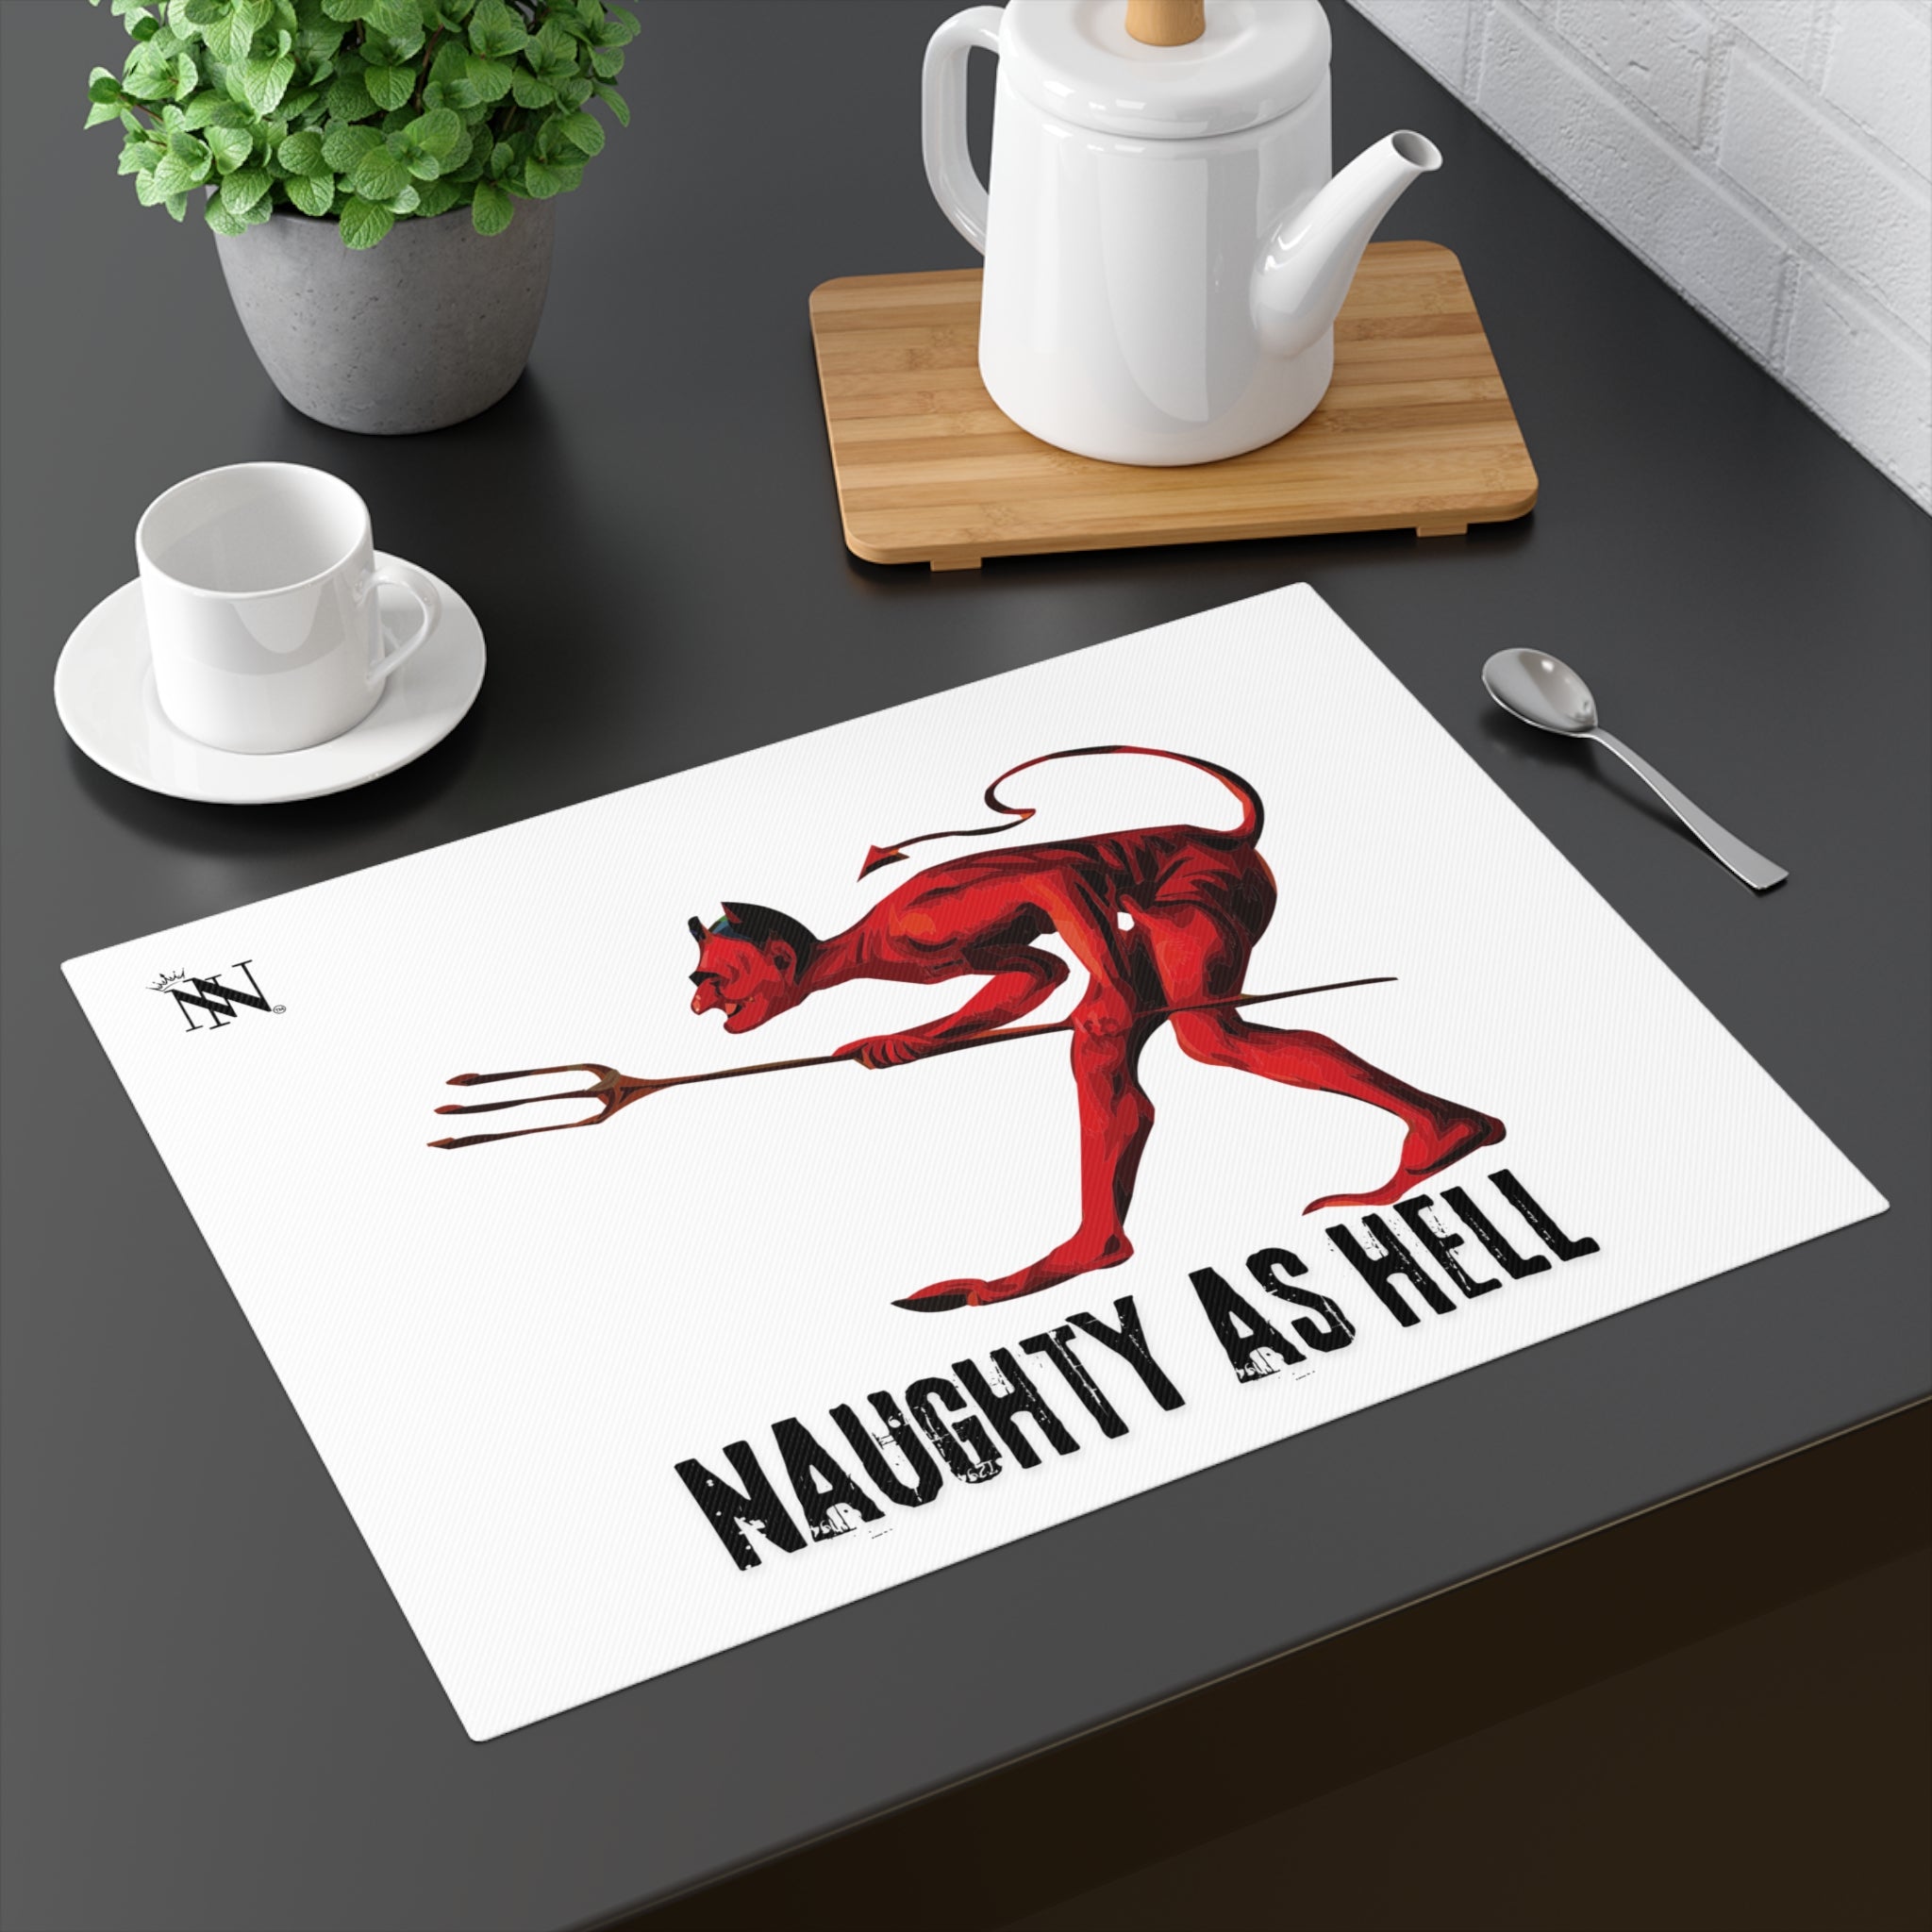 Naughty as hell sexual deviant toys mat